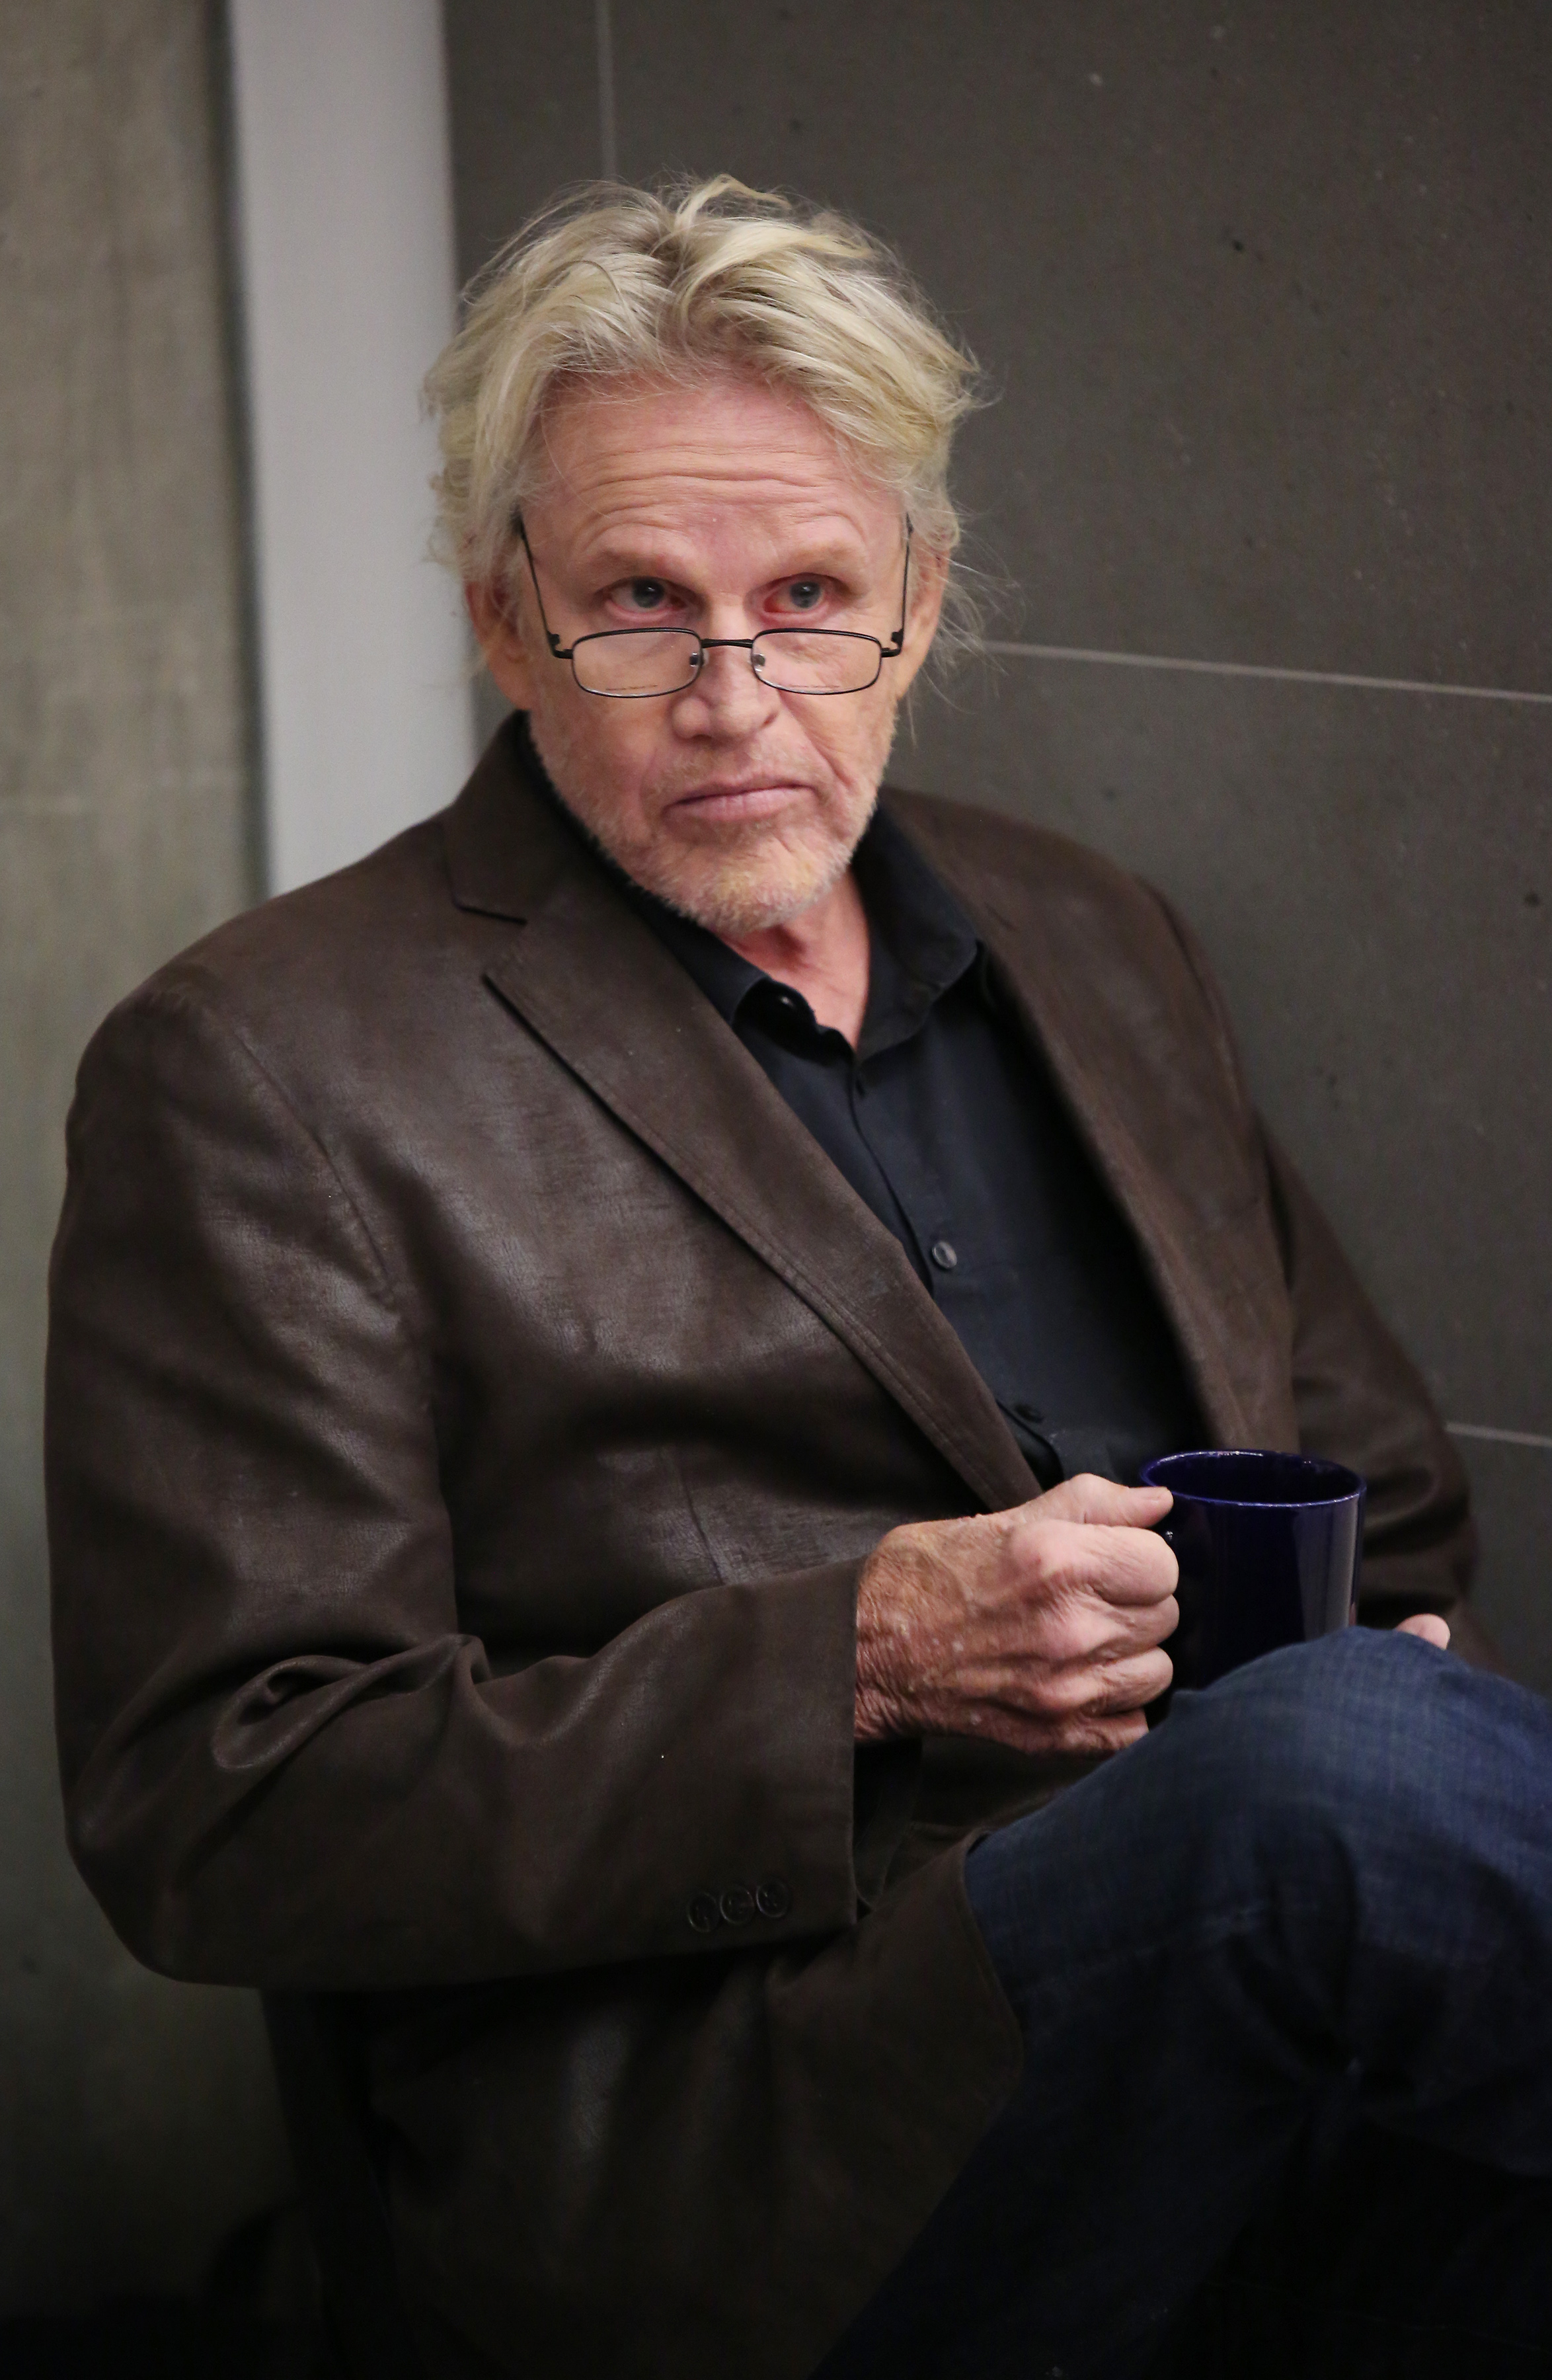 Gary Busey in New York City on September 17, 2019 | Source: Getty Images